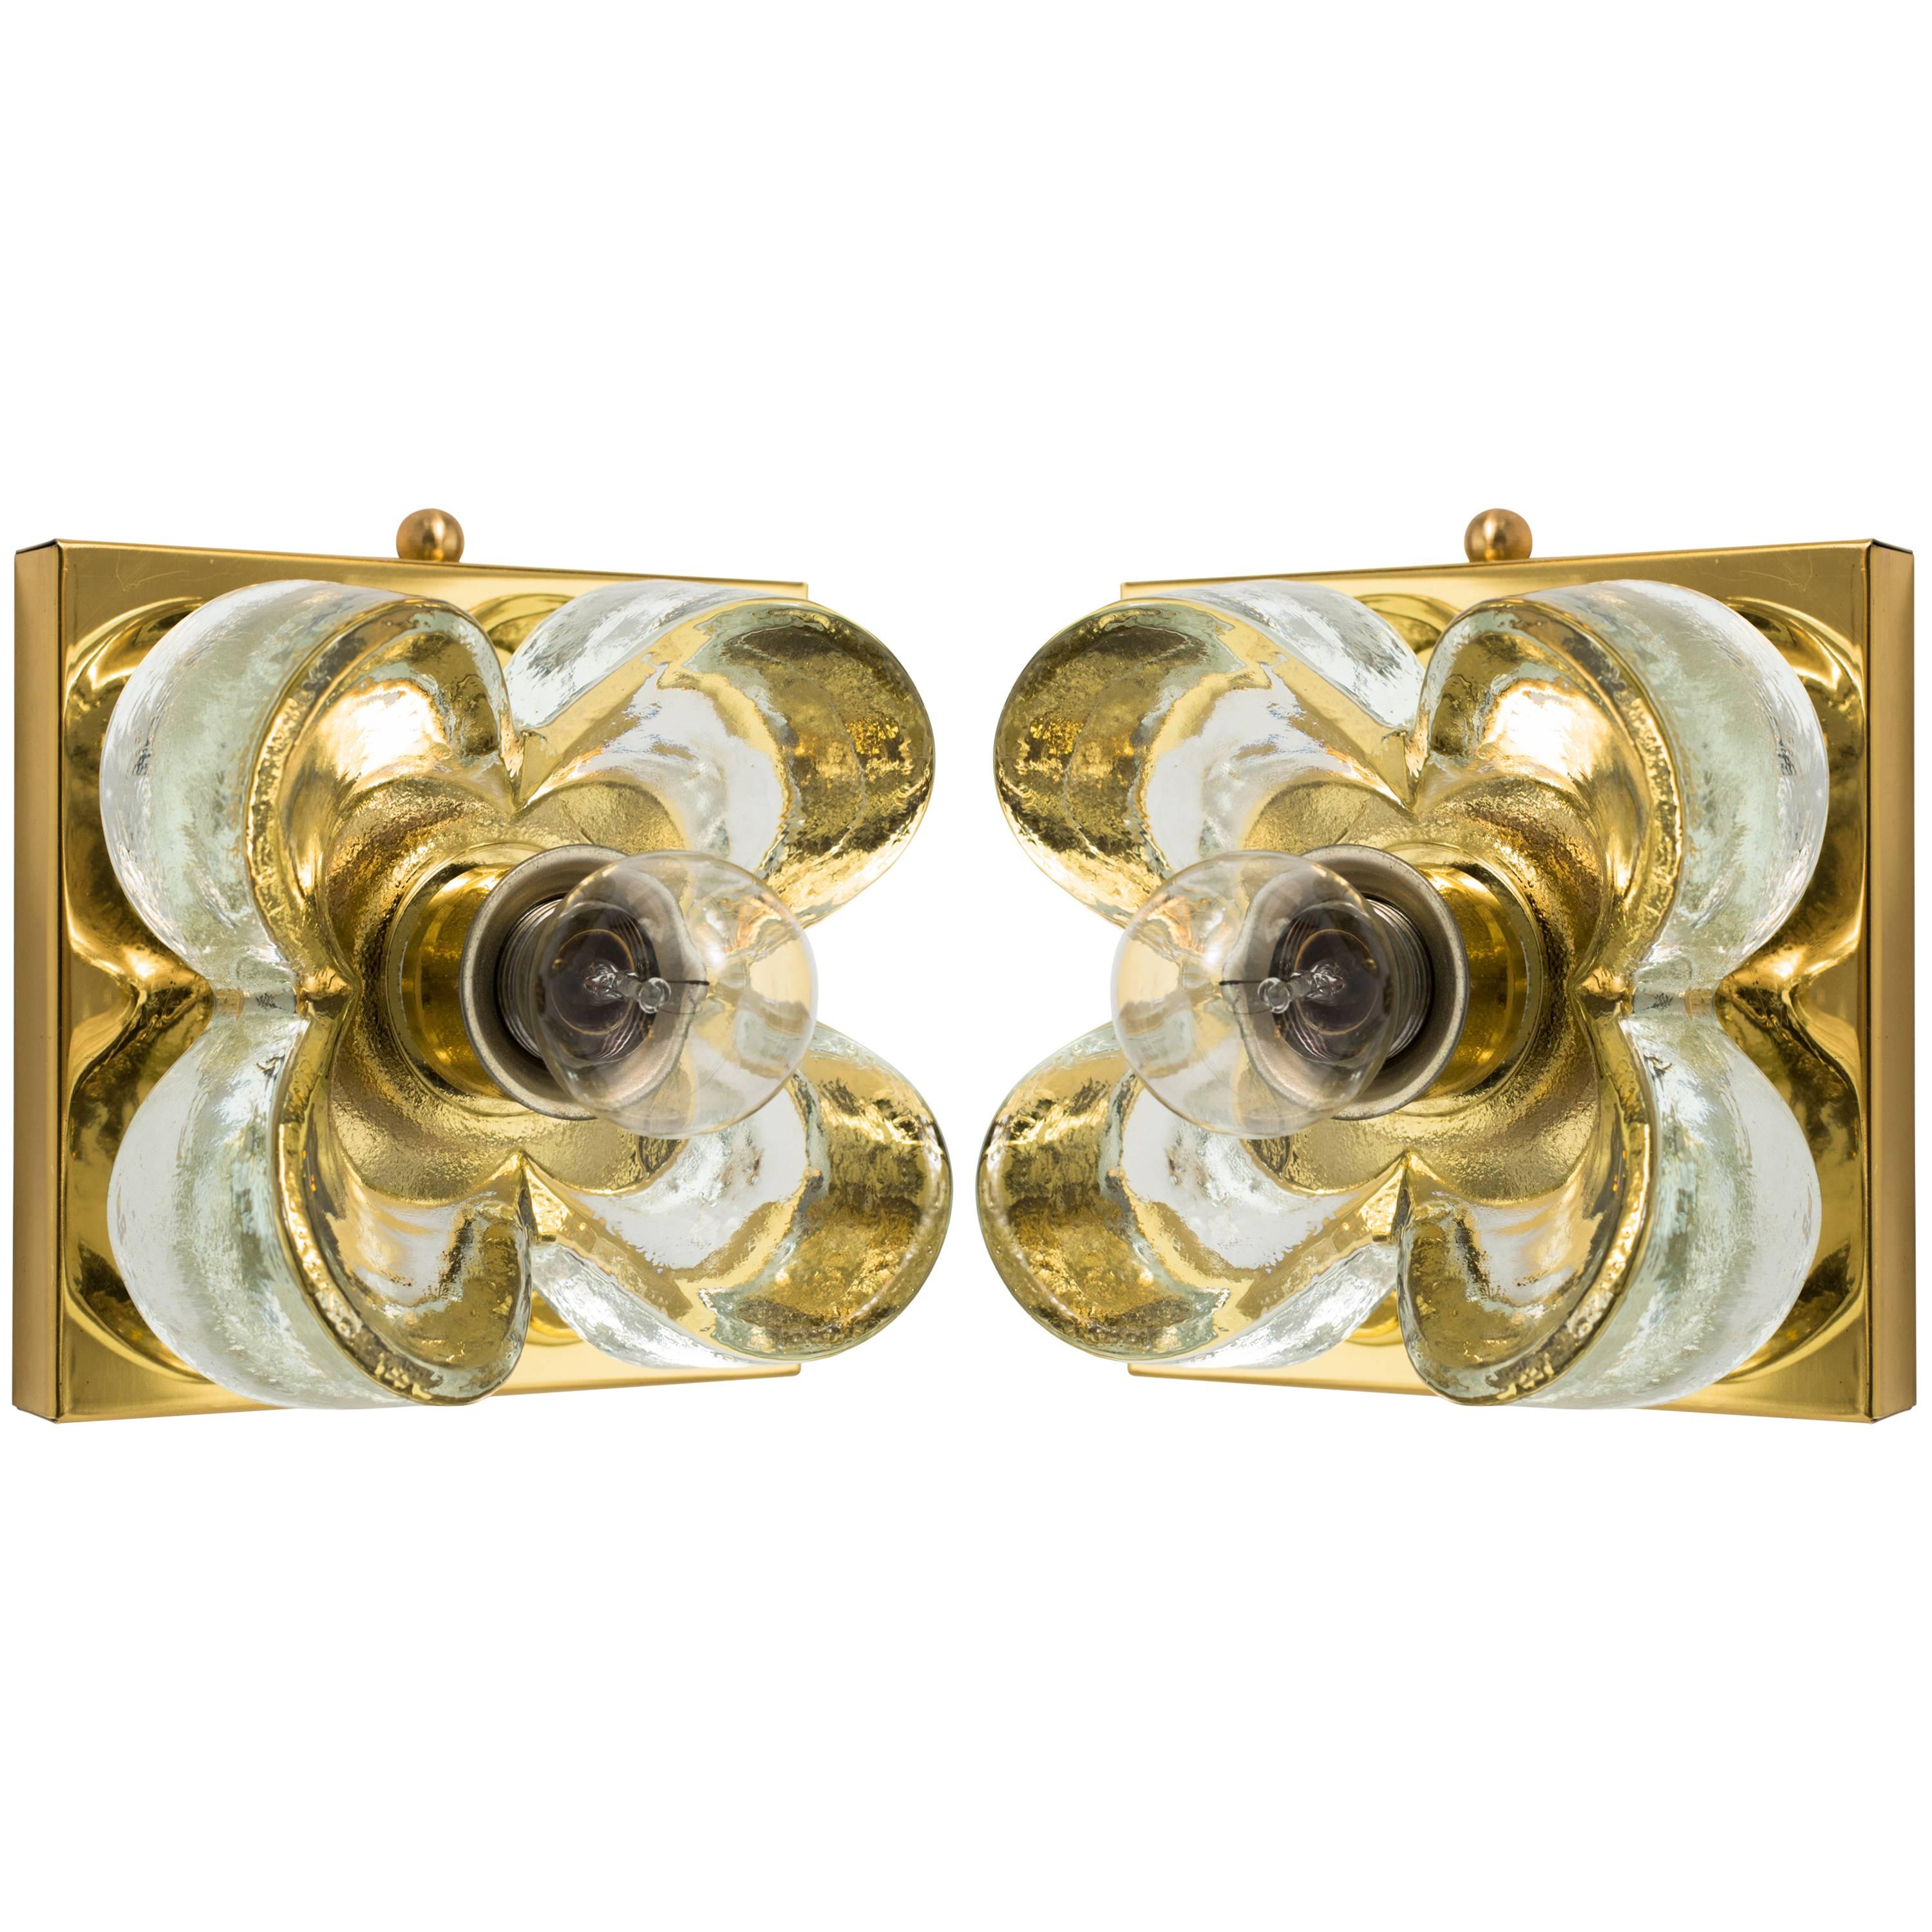 Mid-Century Modern Sconces with Floral Design by Mazzega Pair or Set of 3